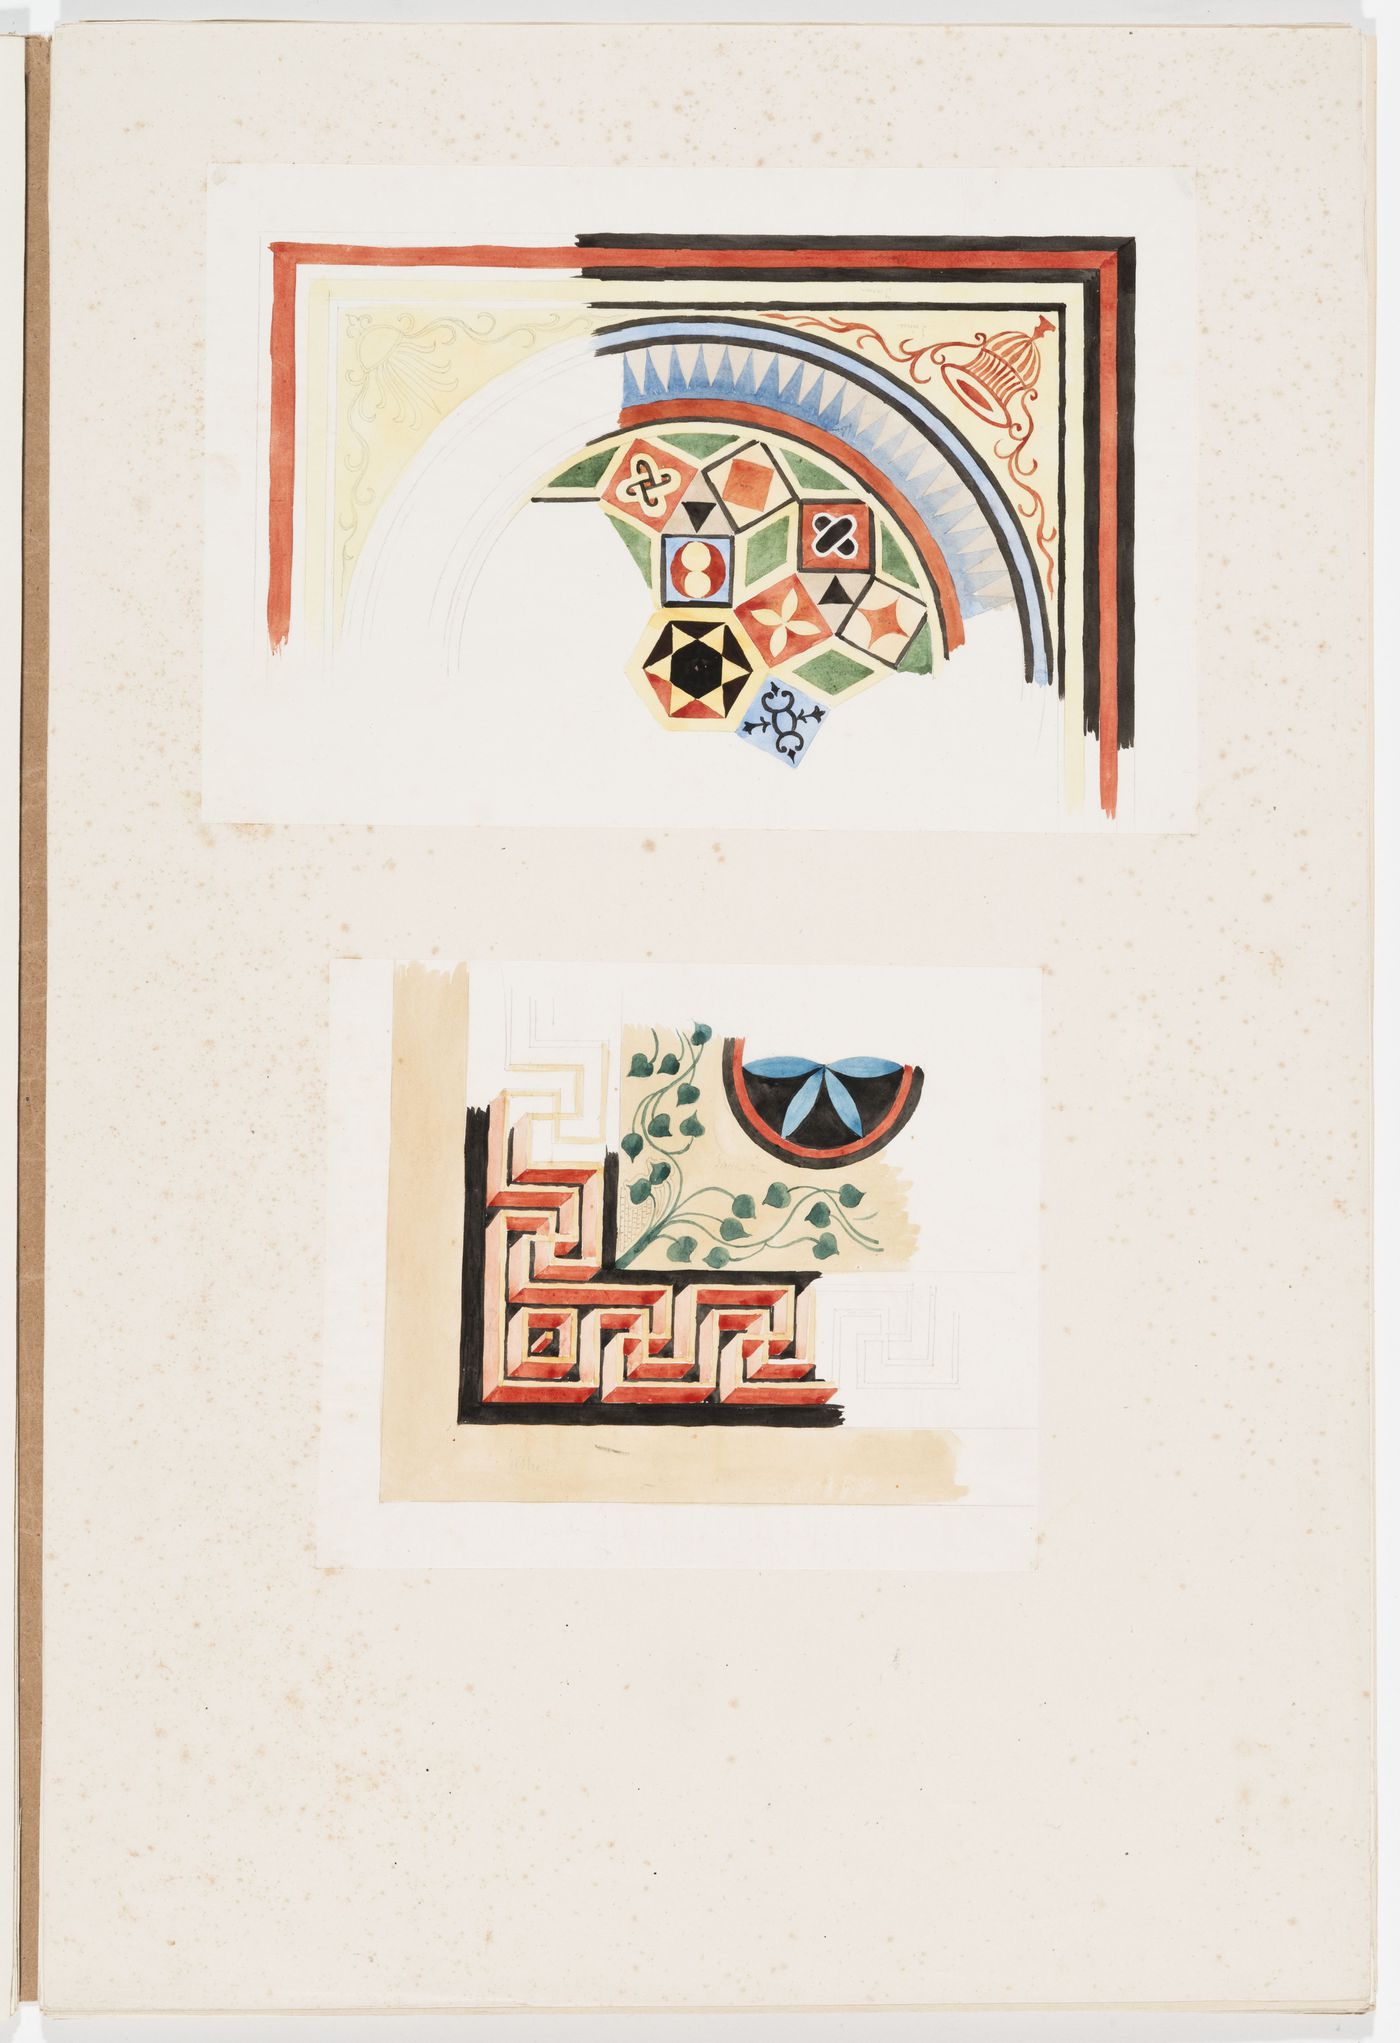 Ornament drawings of two panel segments, one decorated with foliage and fretwork, and the other with foliage, vases and a geometric mosaic pattern